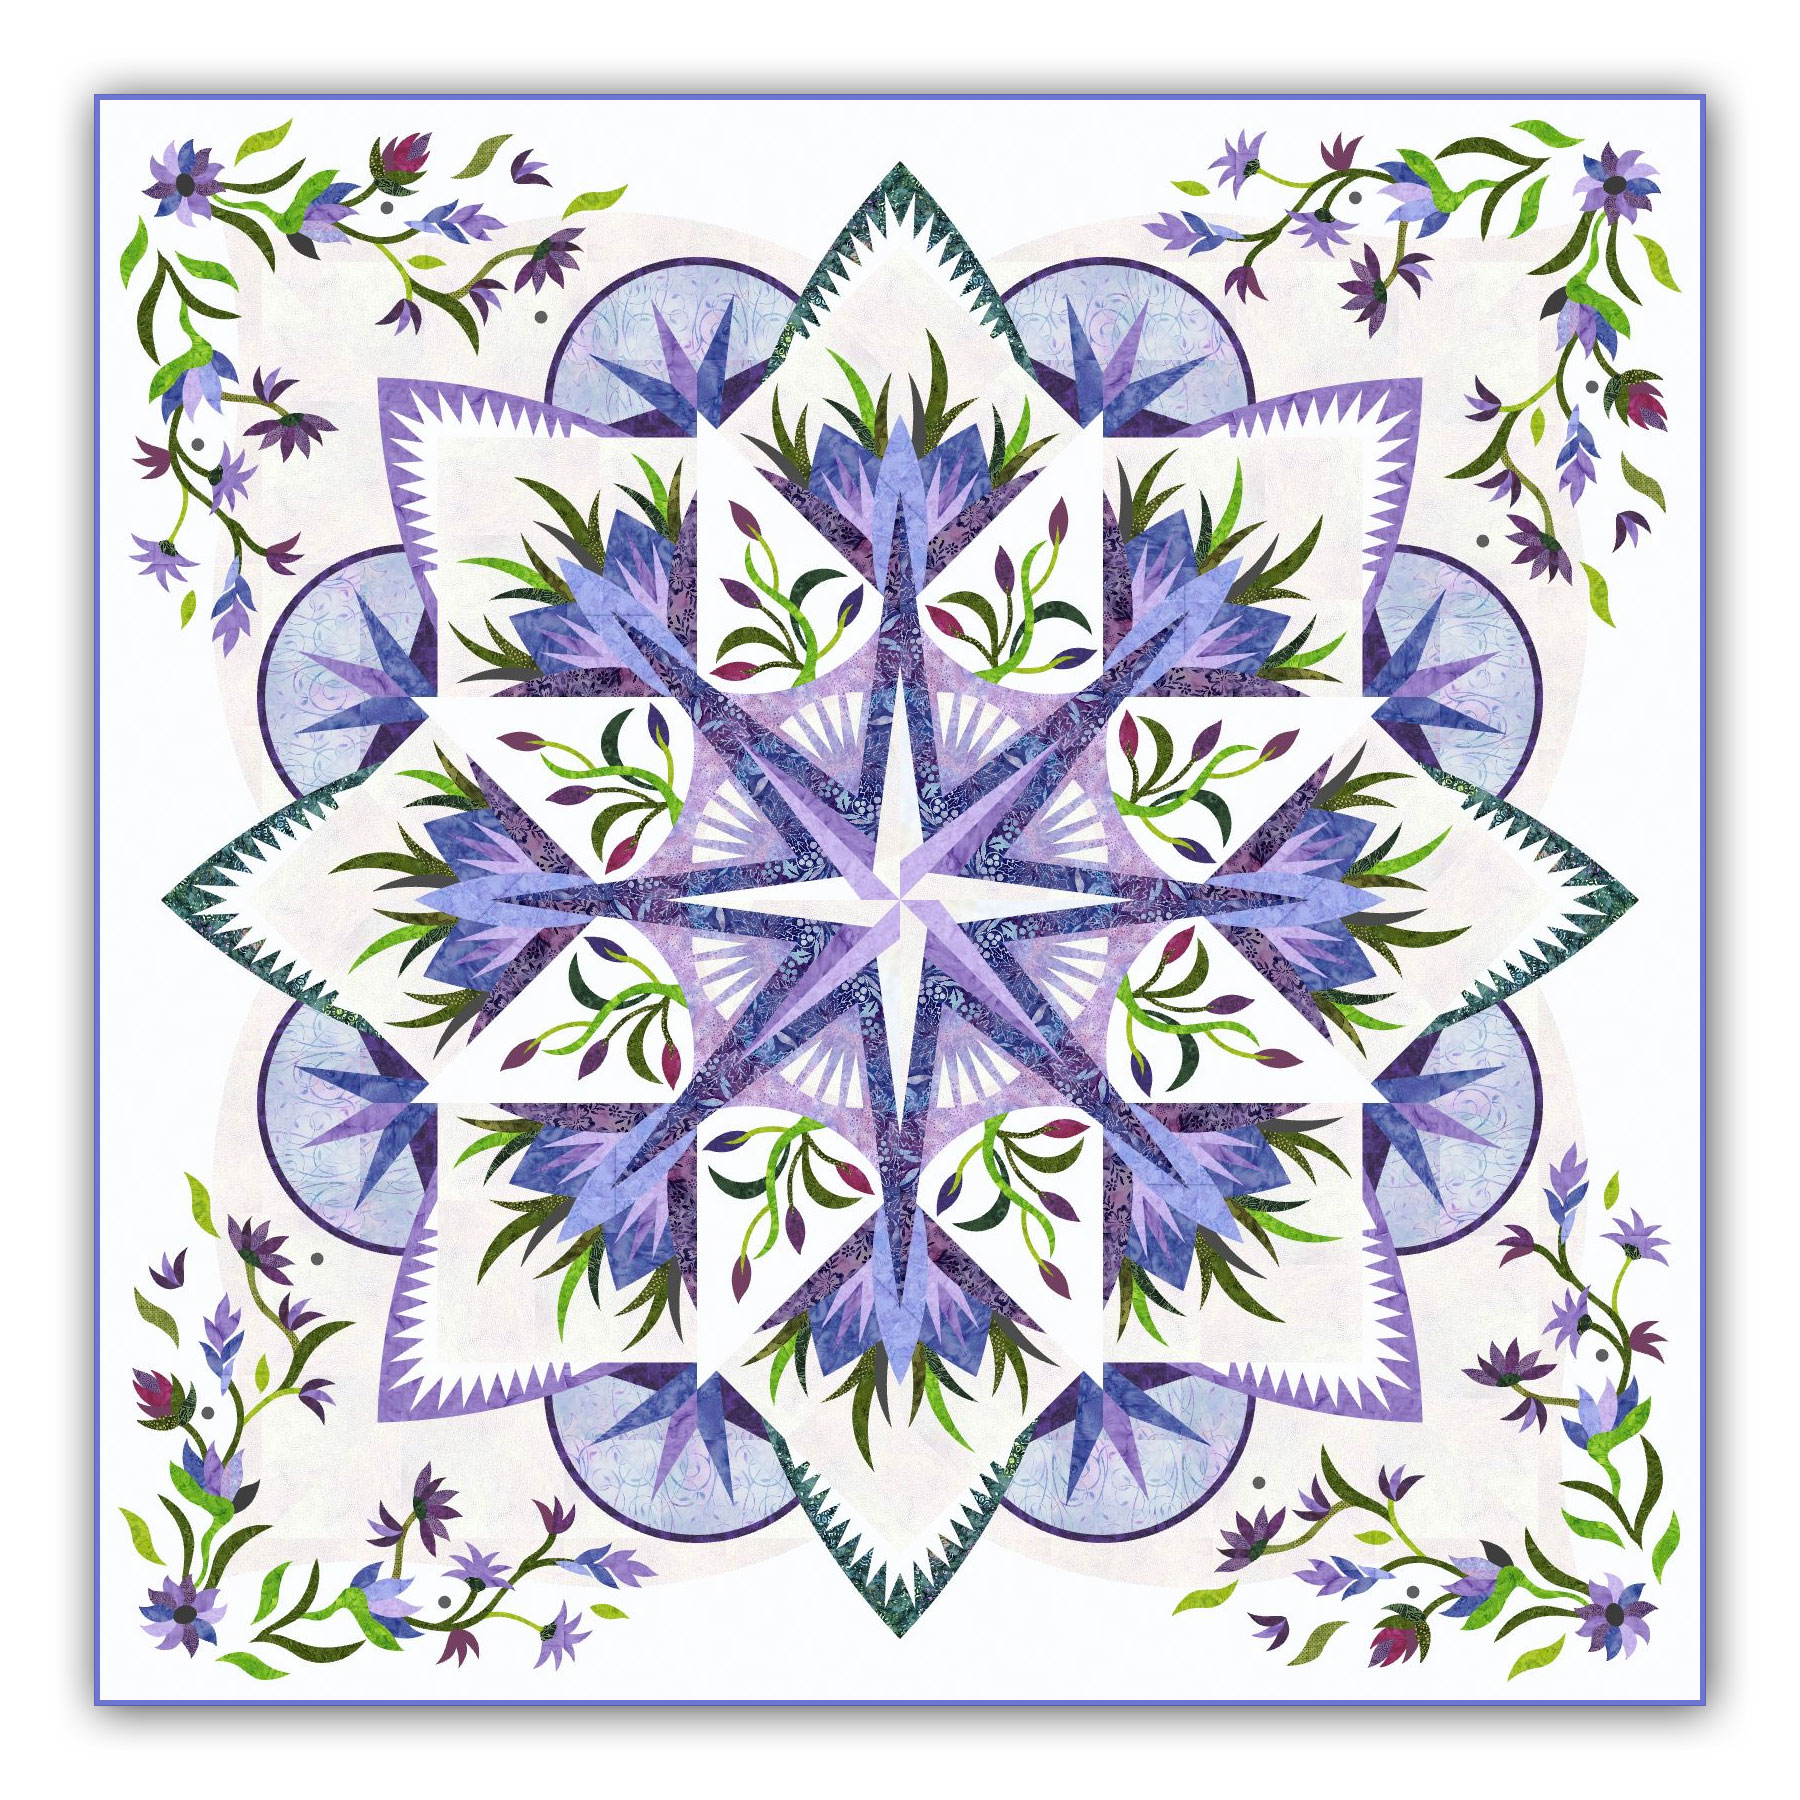 Mini Masterpieces QAL: Foundation Paper Piecing - Blossom Heart Quilts